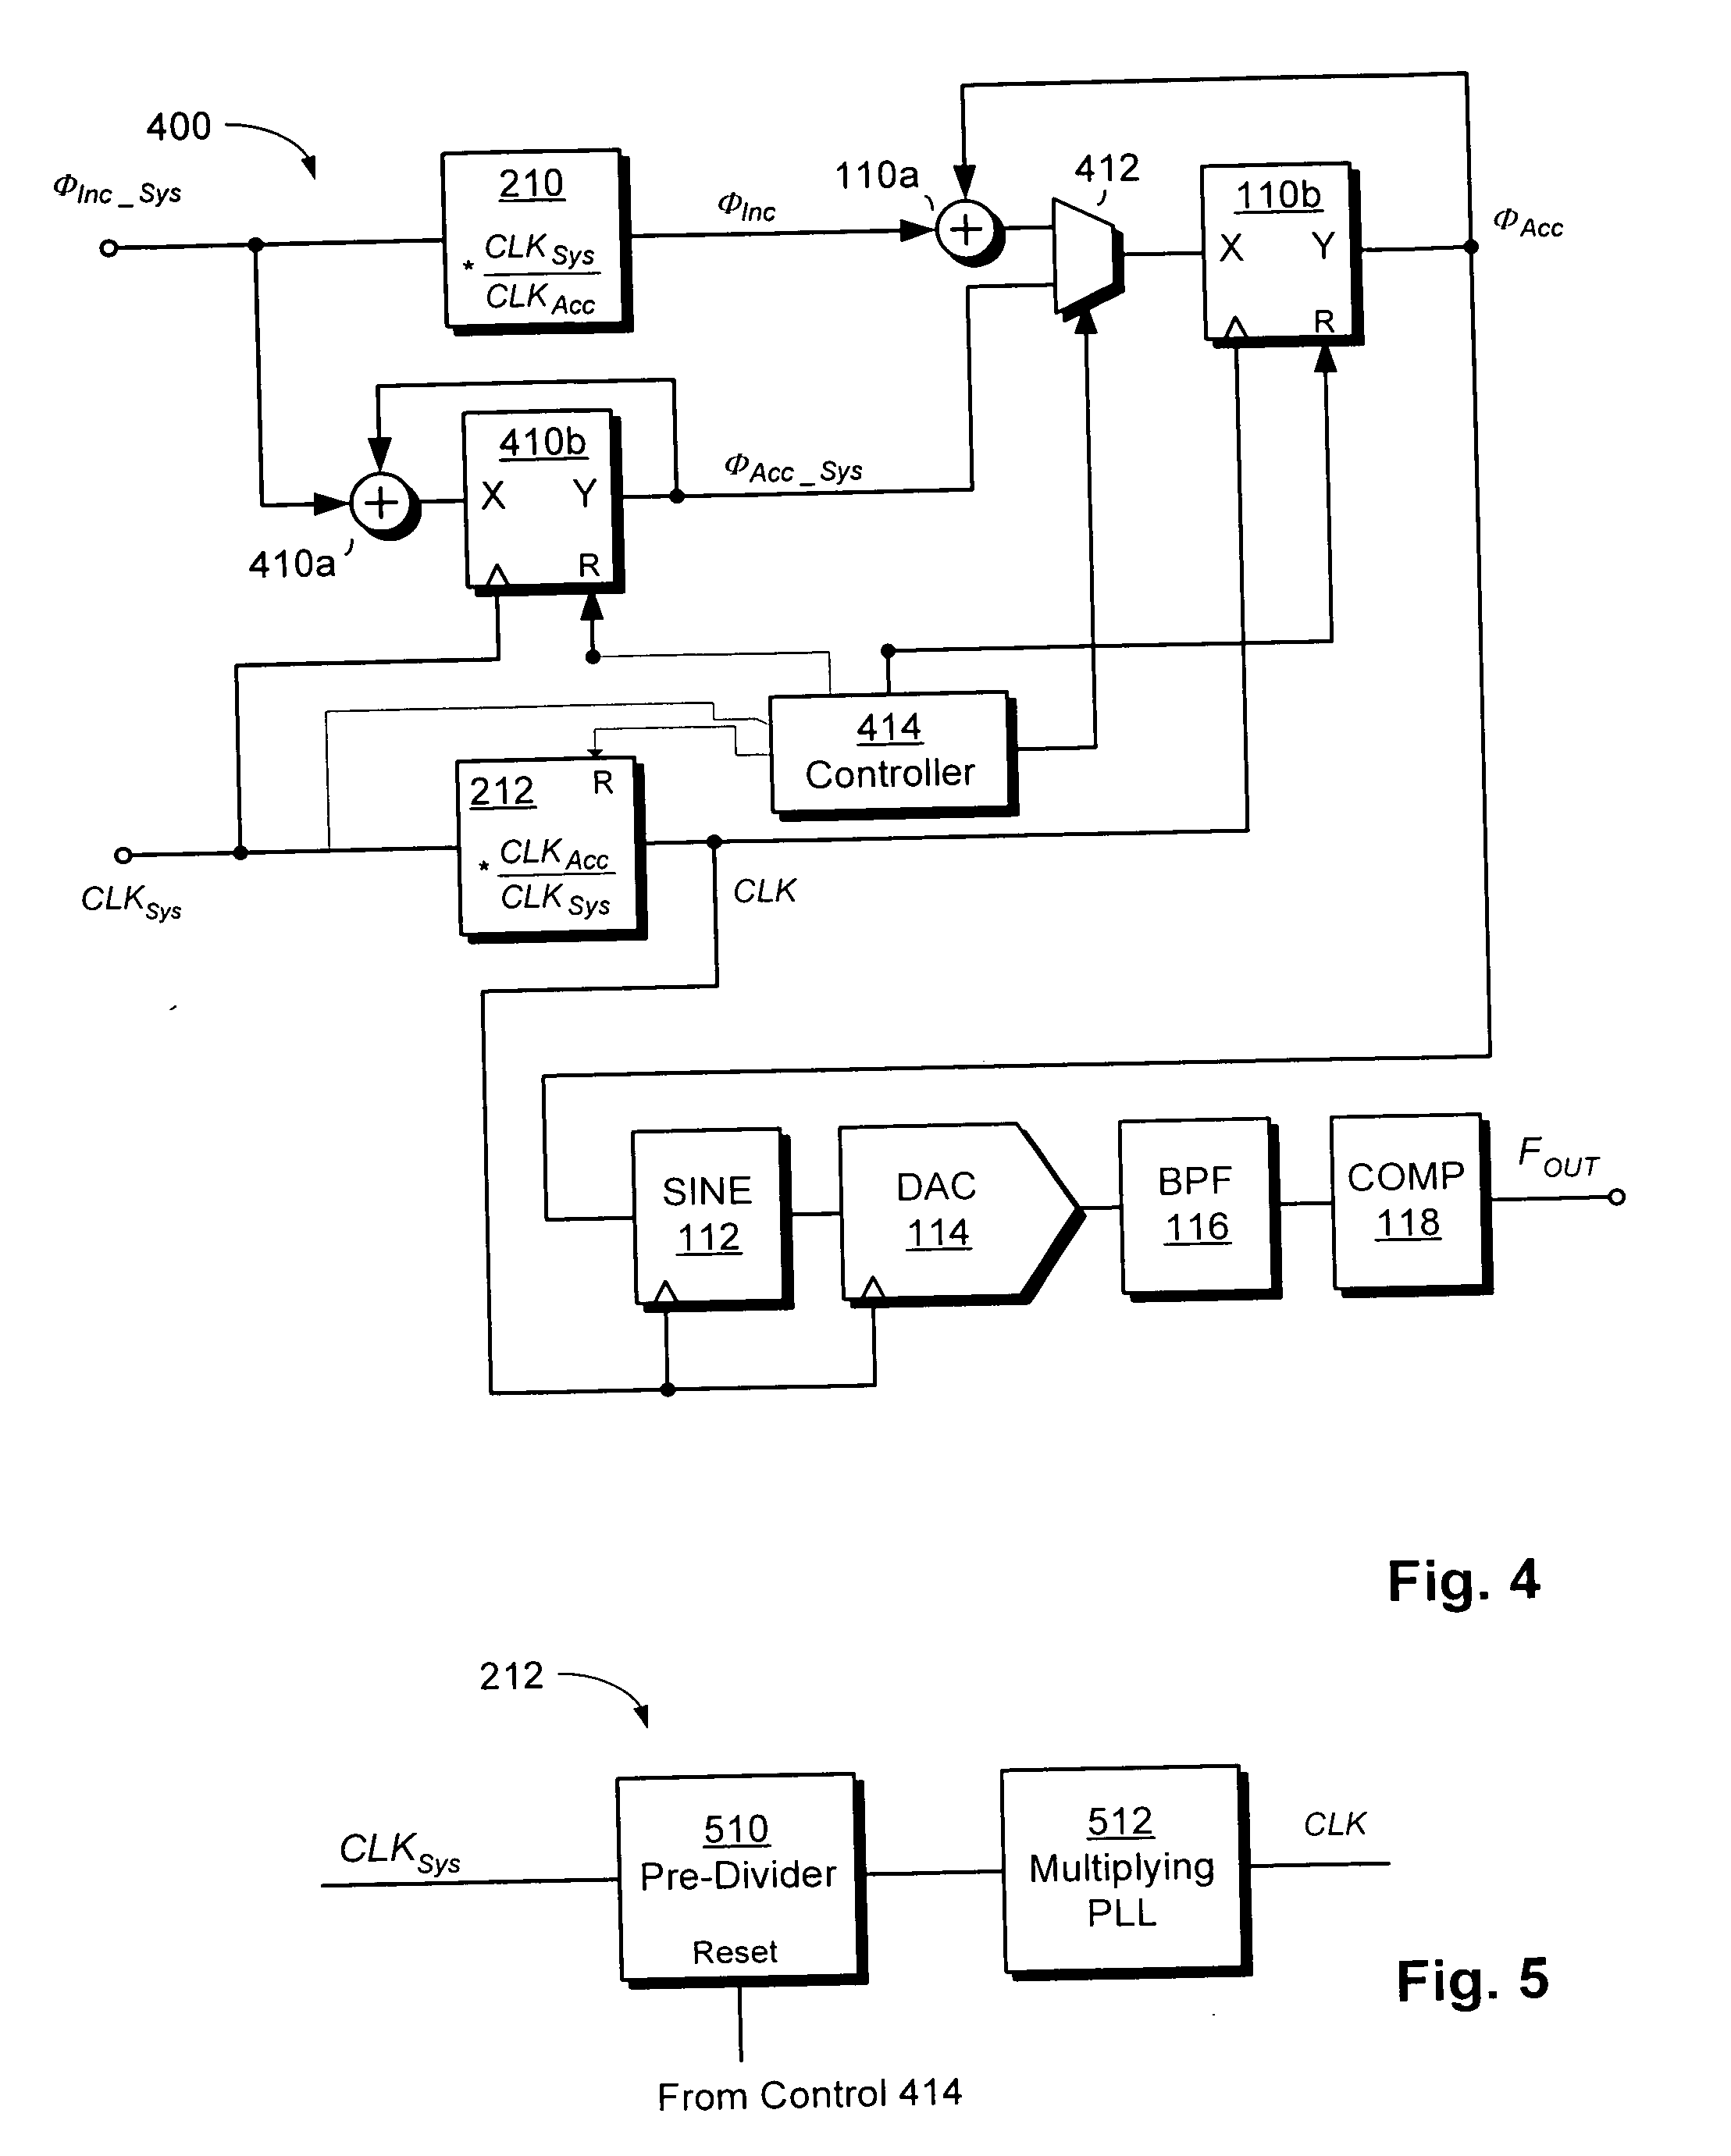 DDS circuit with arbitrary frequency control clock